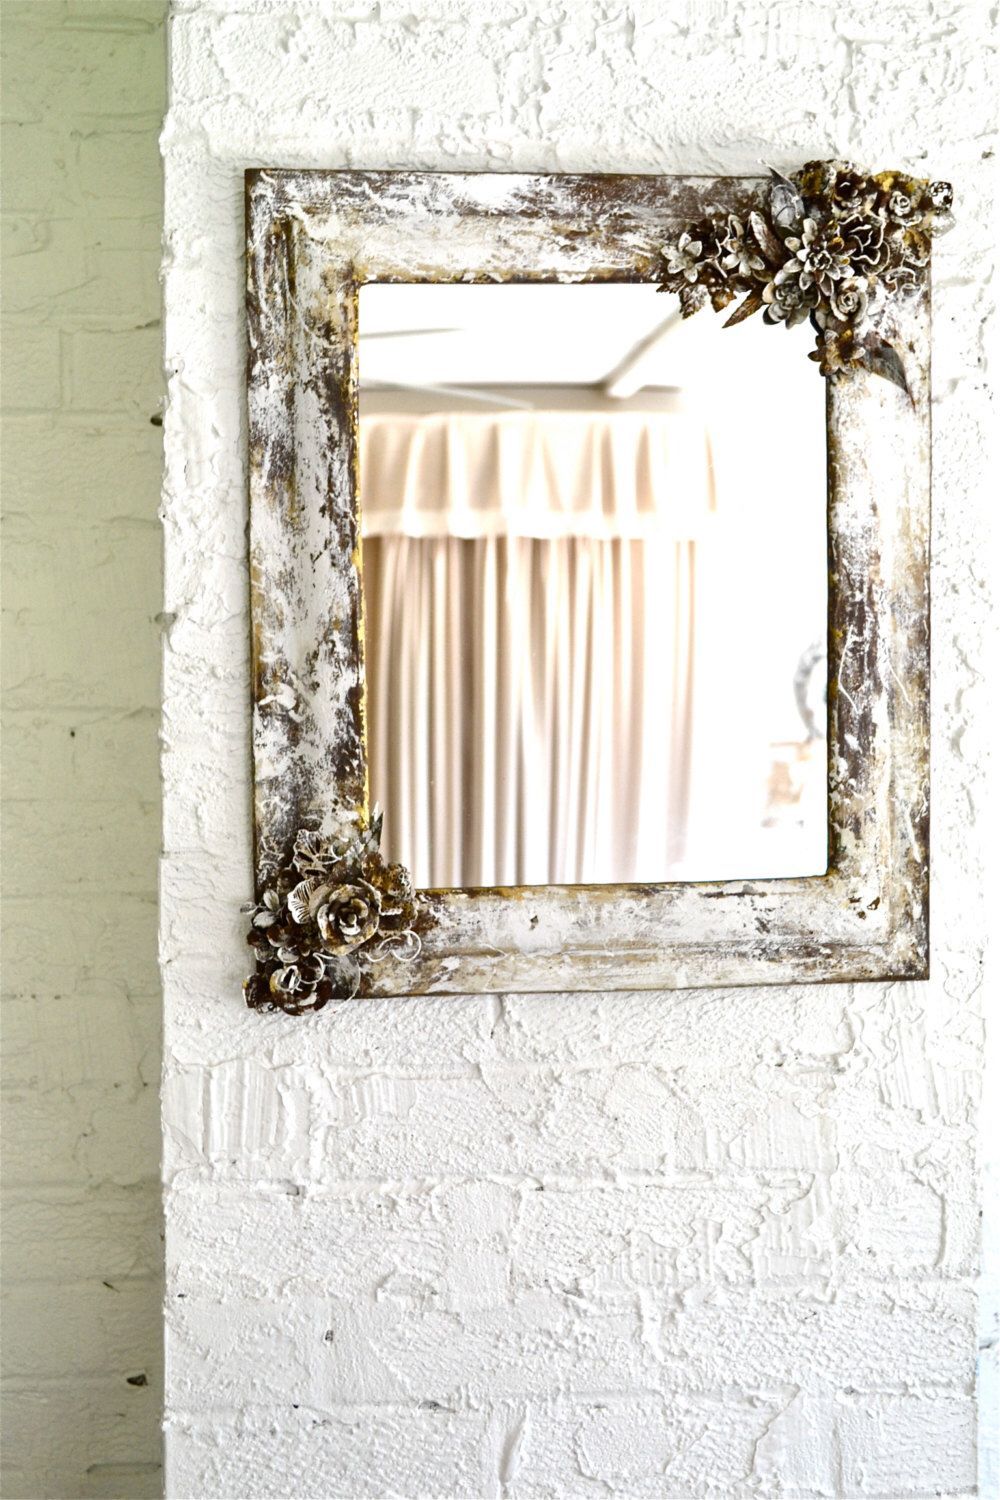 Decorative Metal Rose Framed Mirror Ornate Distress Mirror Rustic Throughout Bruckdale Decorative Flower Accent Mirrors (View 5 of 15)